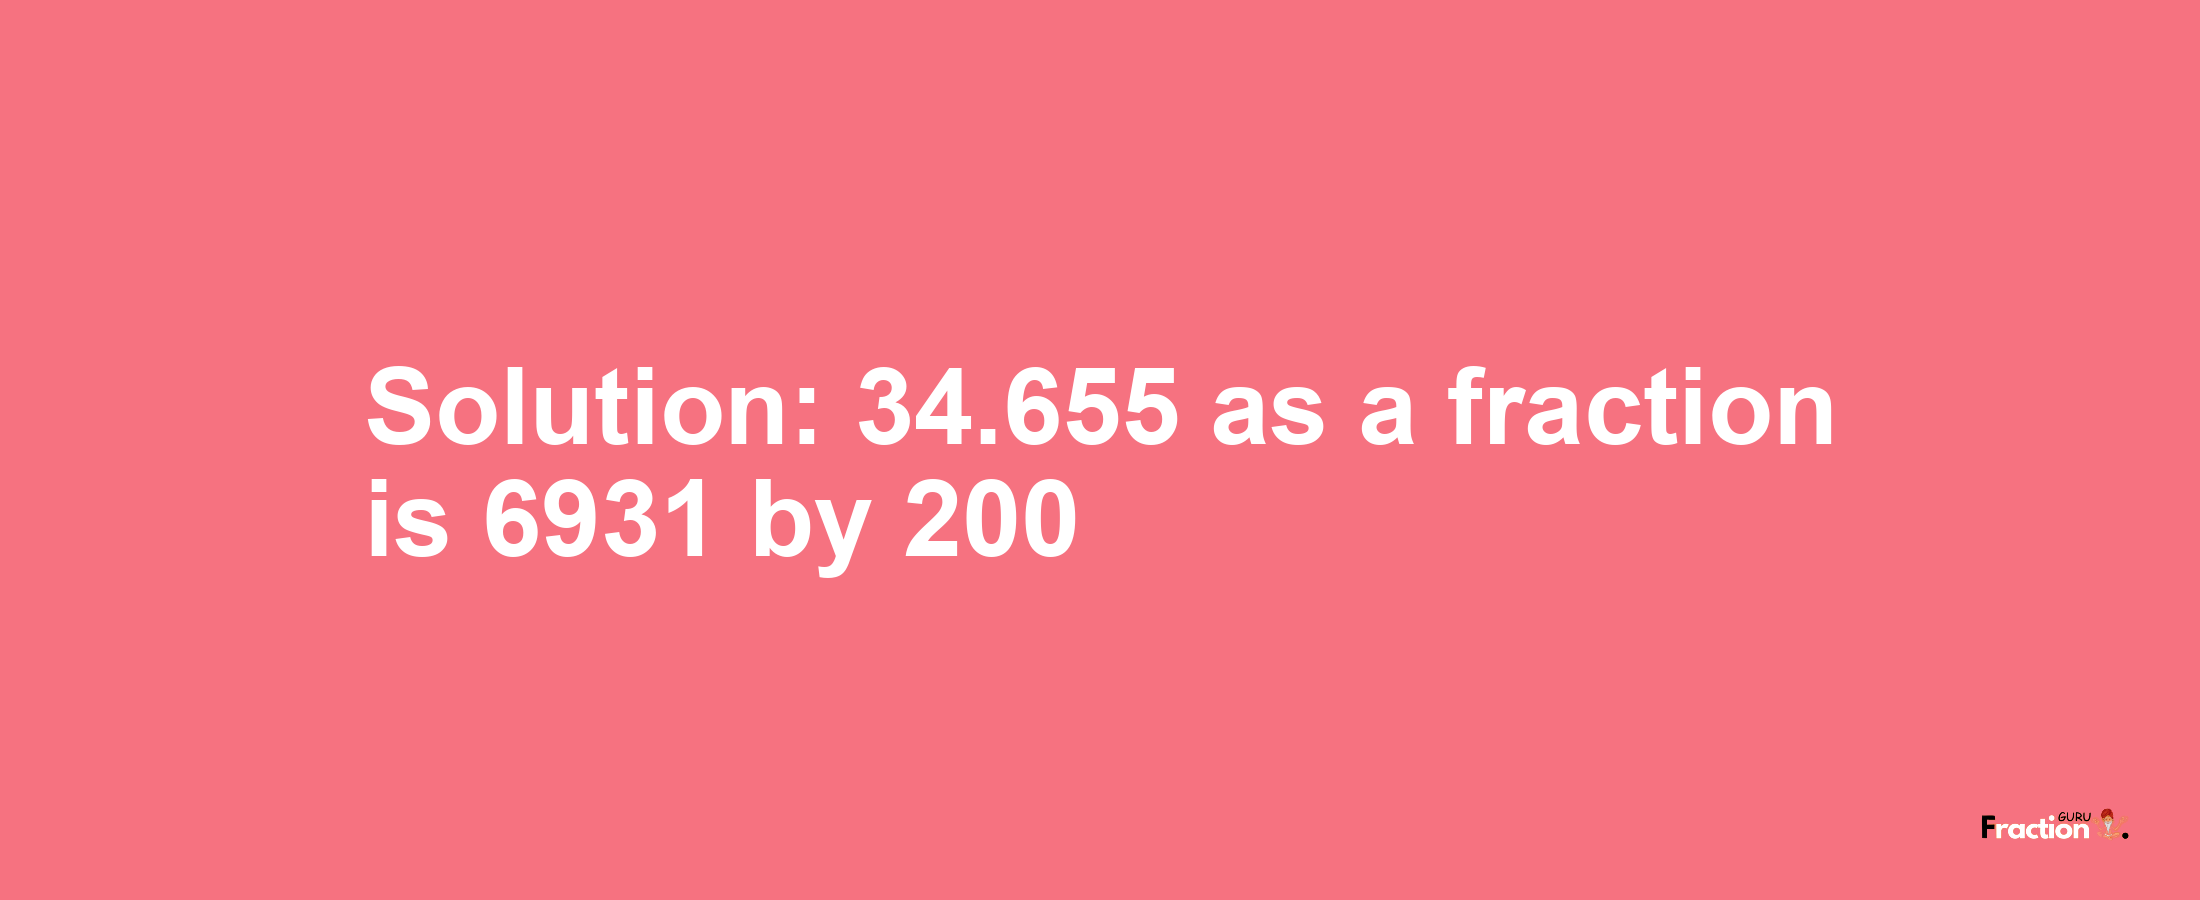 Solution:34.655 as a fraction is 6931/200